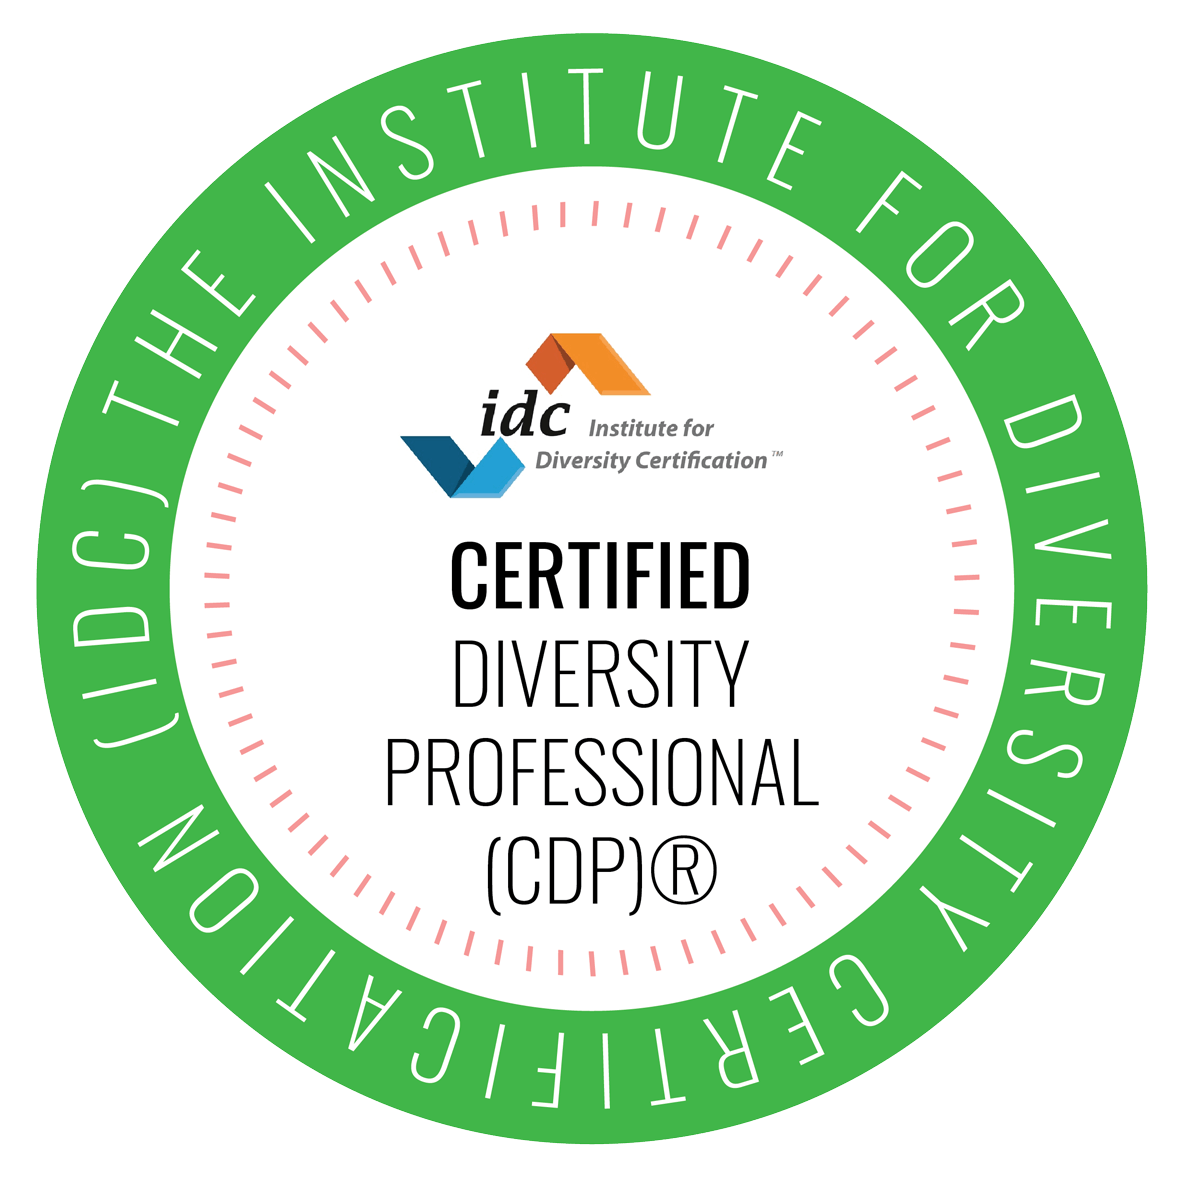 Certified Diversity Professional (CDP)® badge